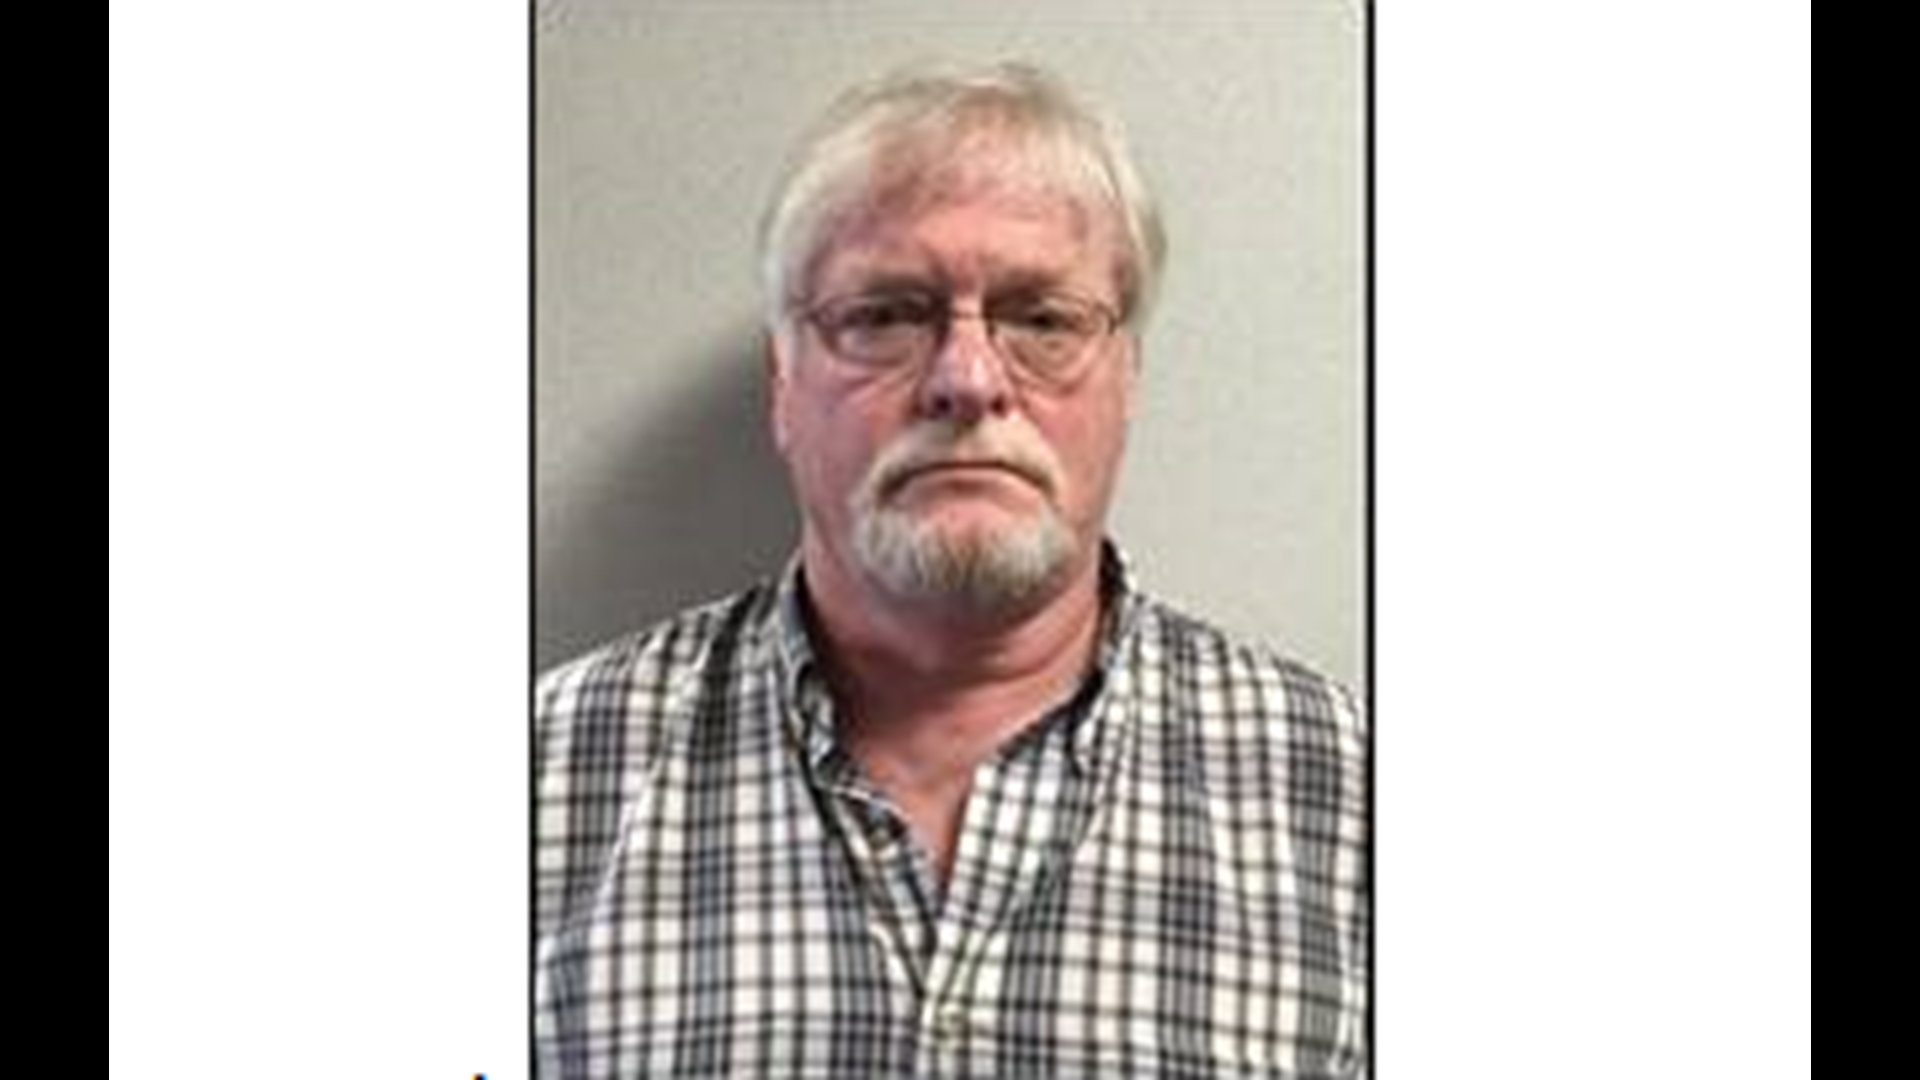 Oklahoma Man Arrested After Allegedly Trying To Have Sex With A Minor In Fort Smith 9144